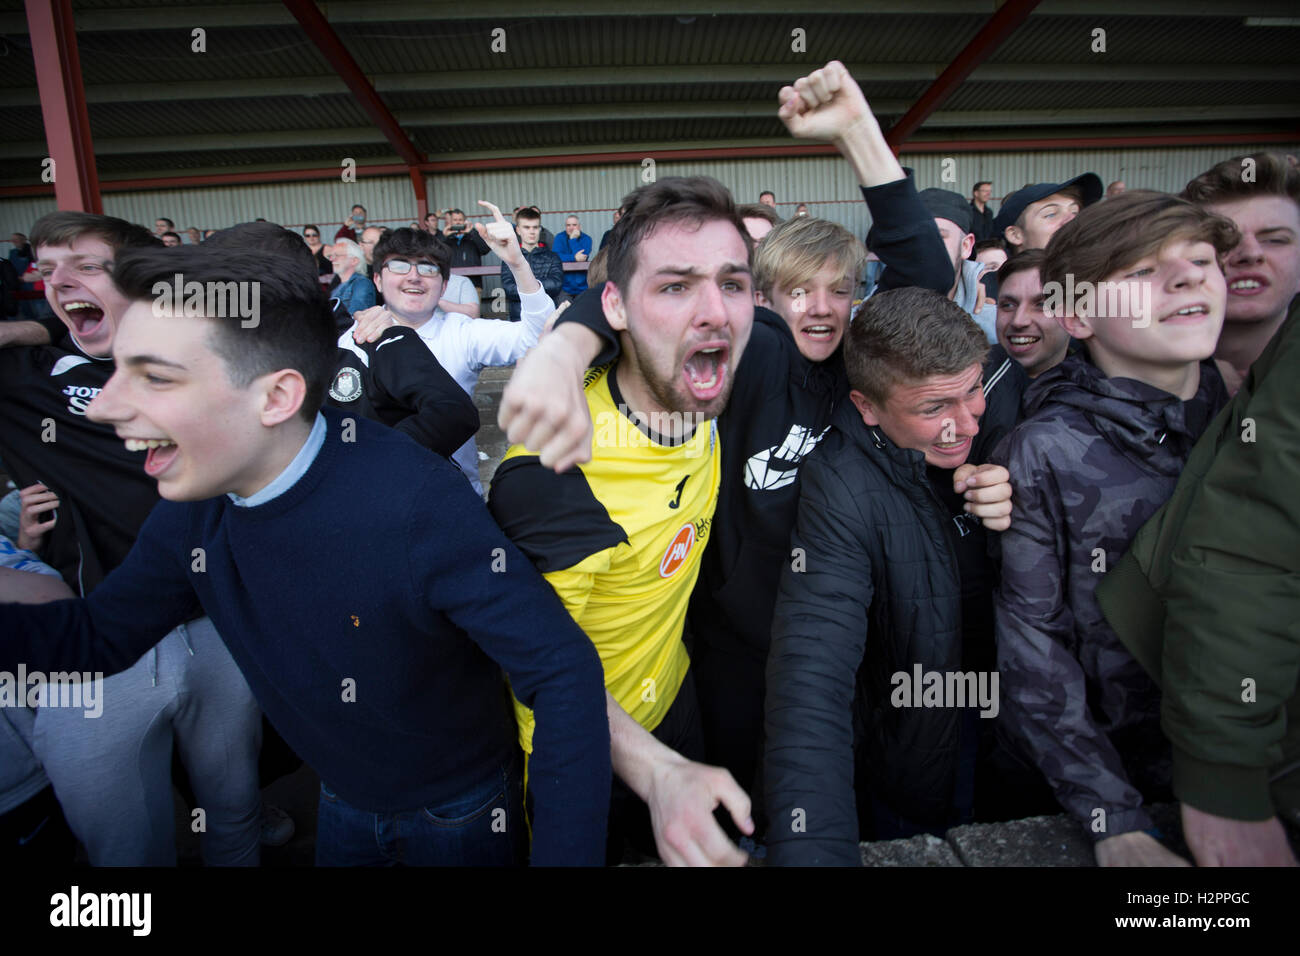 Visiting fans in the away end celebrating with midfielder Ian McFarland after East Stirlingshire took on Edinburgh City in the second leg of the Scottish League pyramid play-off at Ochilview Park, Stenhousemuir. The play-offs were introduced in 2015 with the winners of the Highland and Lowland Leagues playing-off for the chance to play the club which finished bottom of Scottish League 2. Edinburgh City won the match 1-0 giving them a 2-1 aggregate victory making them the first club in Scottish League history to be promoted into the league. Stock Photo